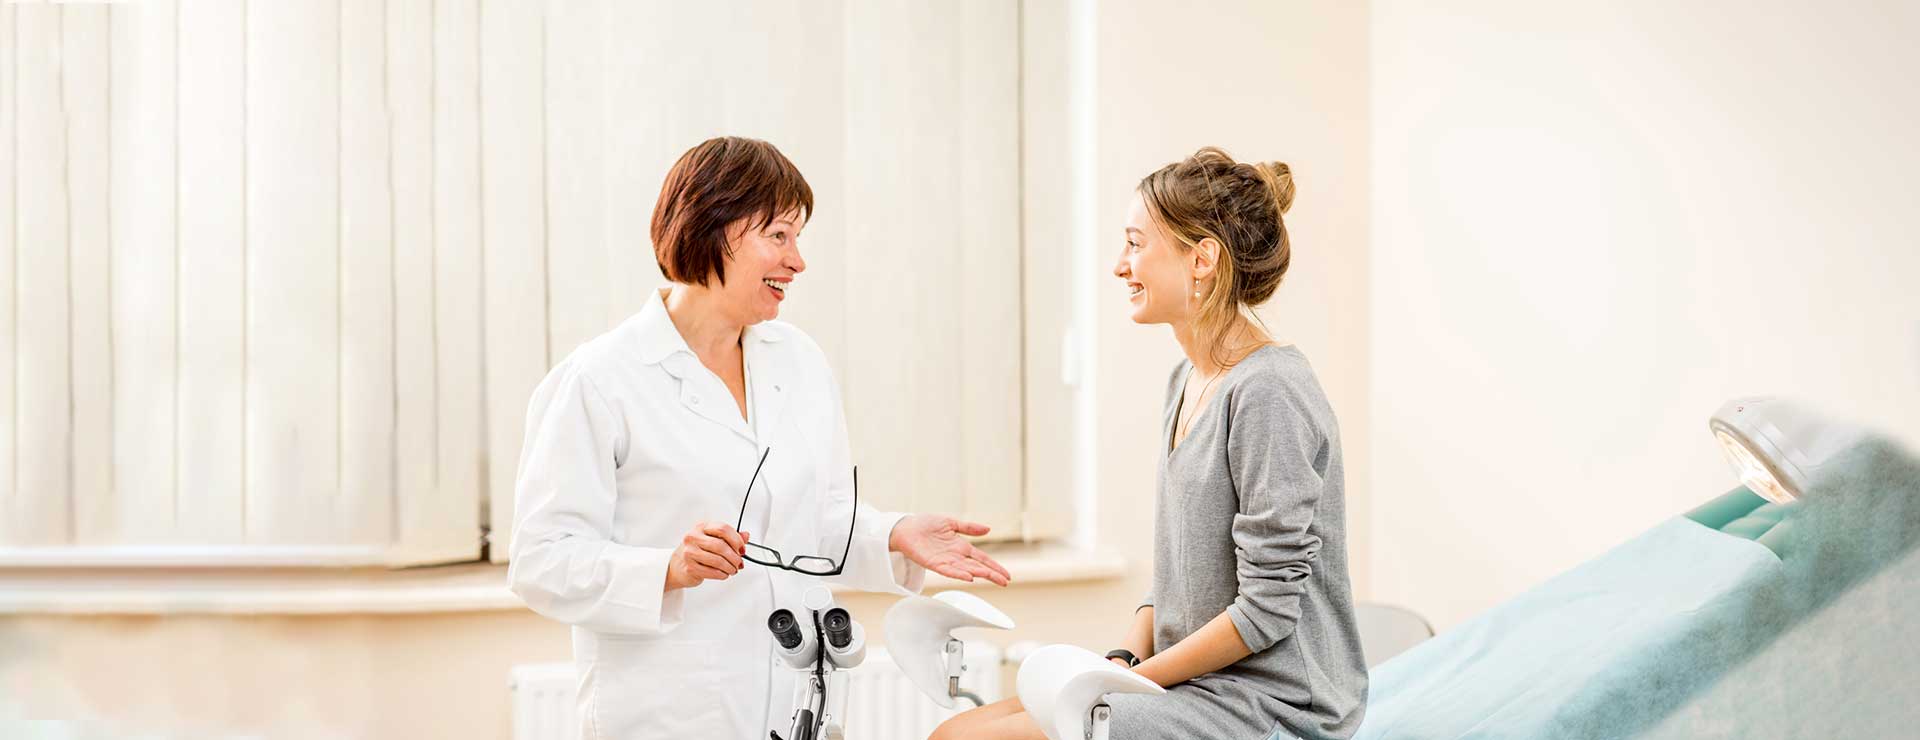 7 Things You Should Always Discuss with Your Gynecologist Johns Hopkins Medicine image photo